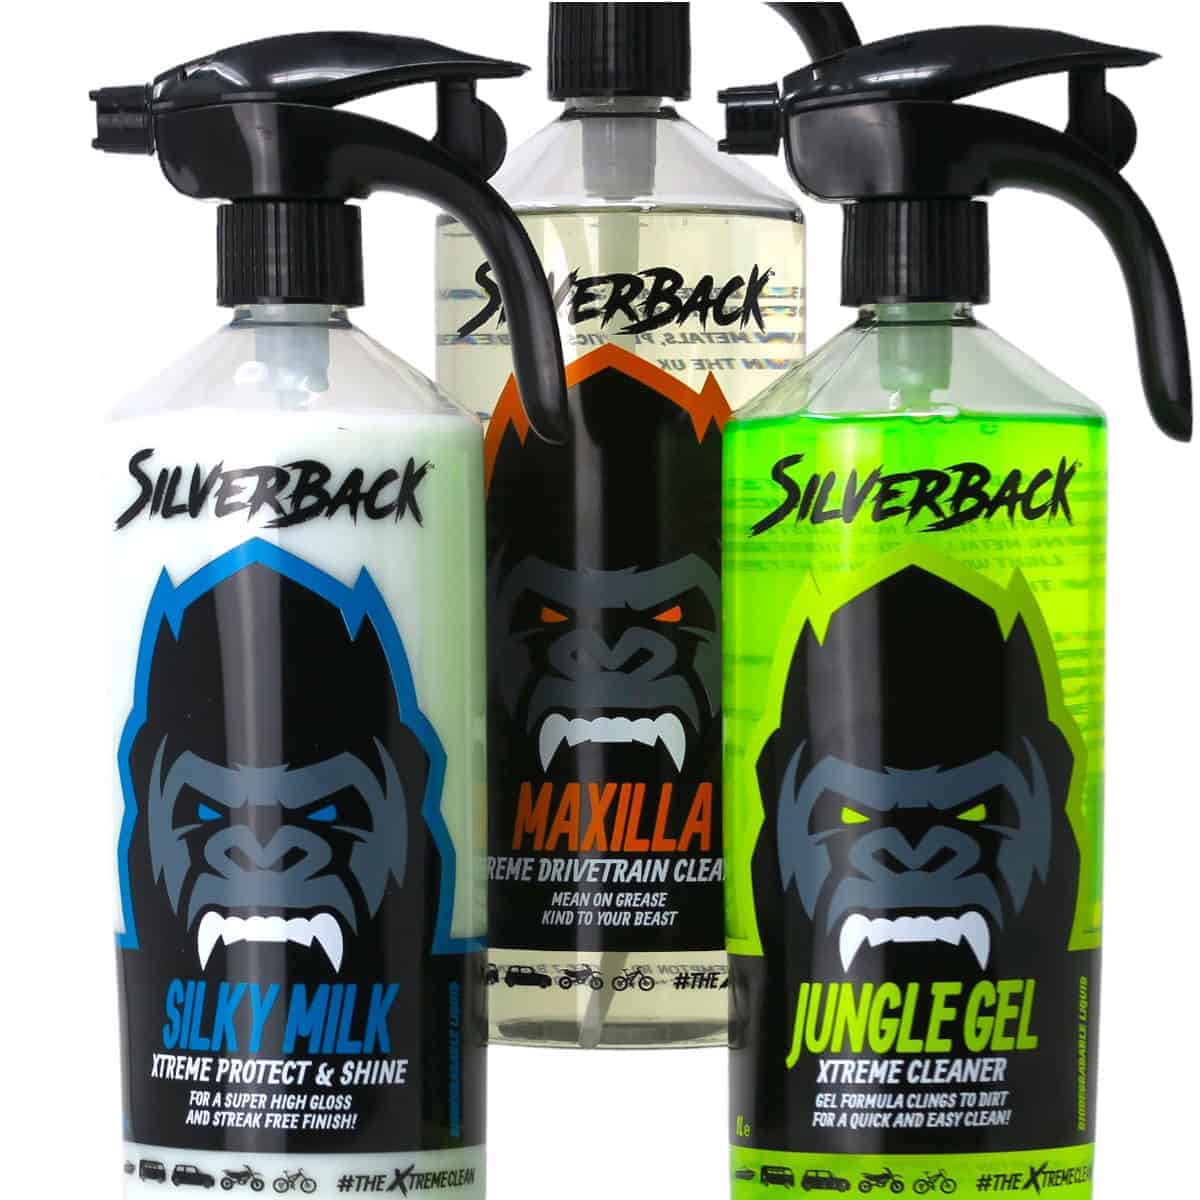 Silverback Motorcycle Cleaning Gift Box: The 3 essential treatments for your motorcycle & dirtbike to come up clean, fast